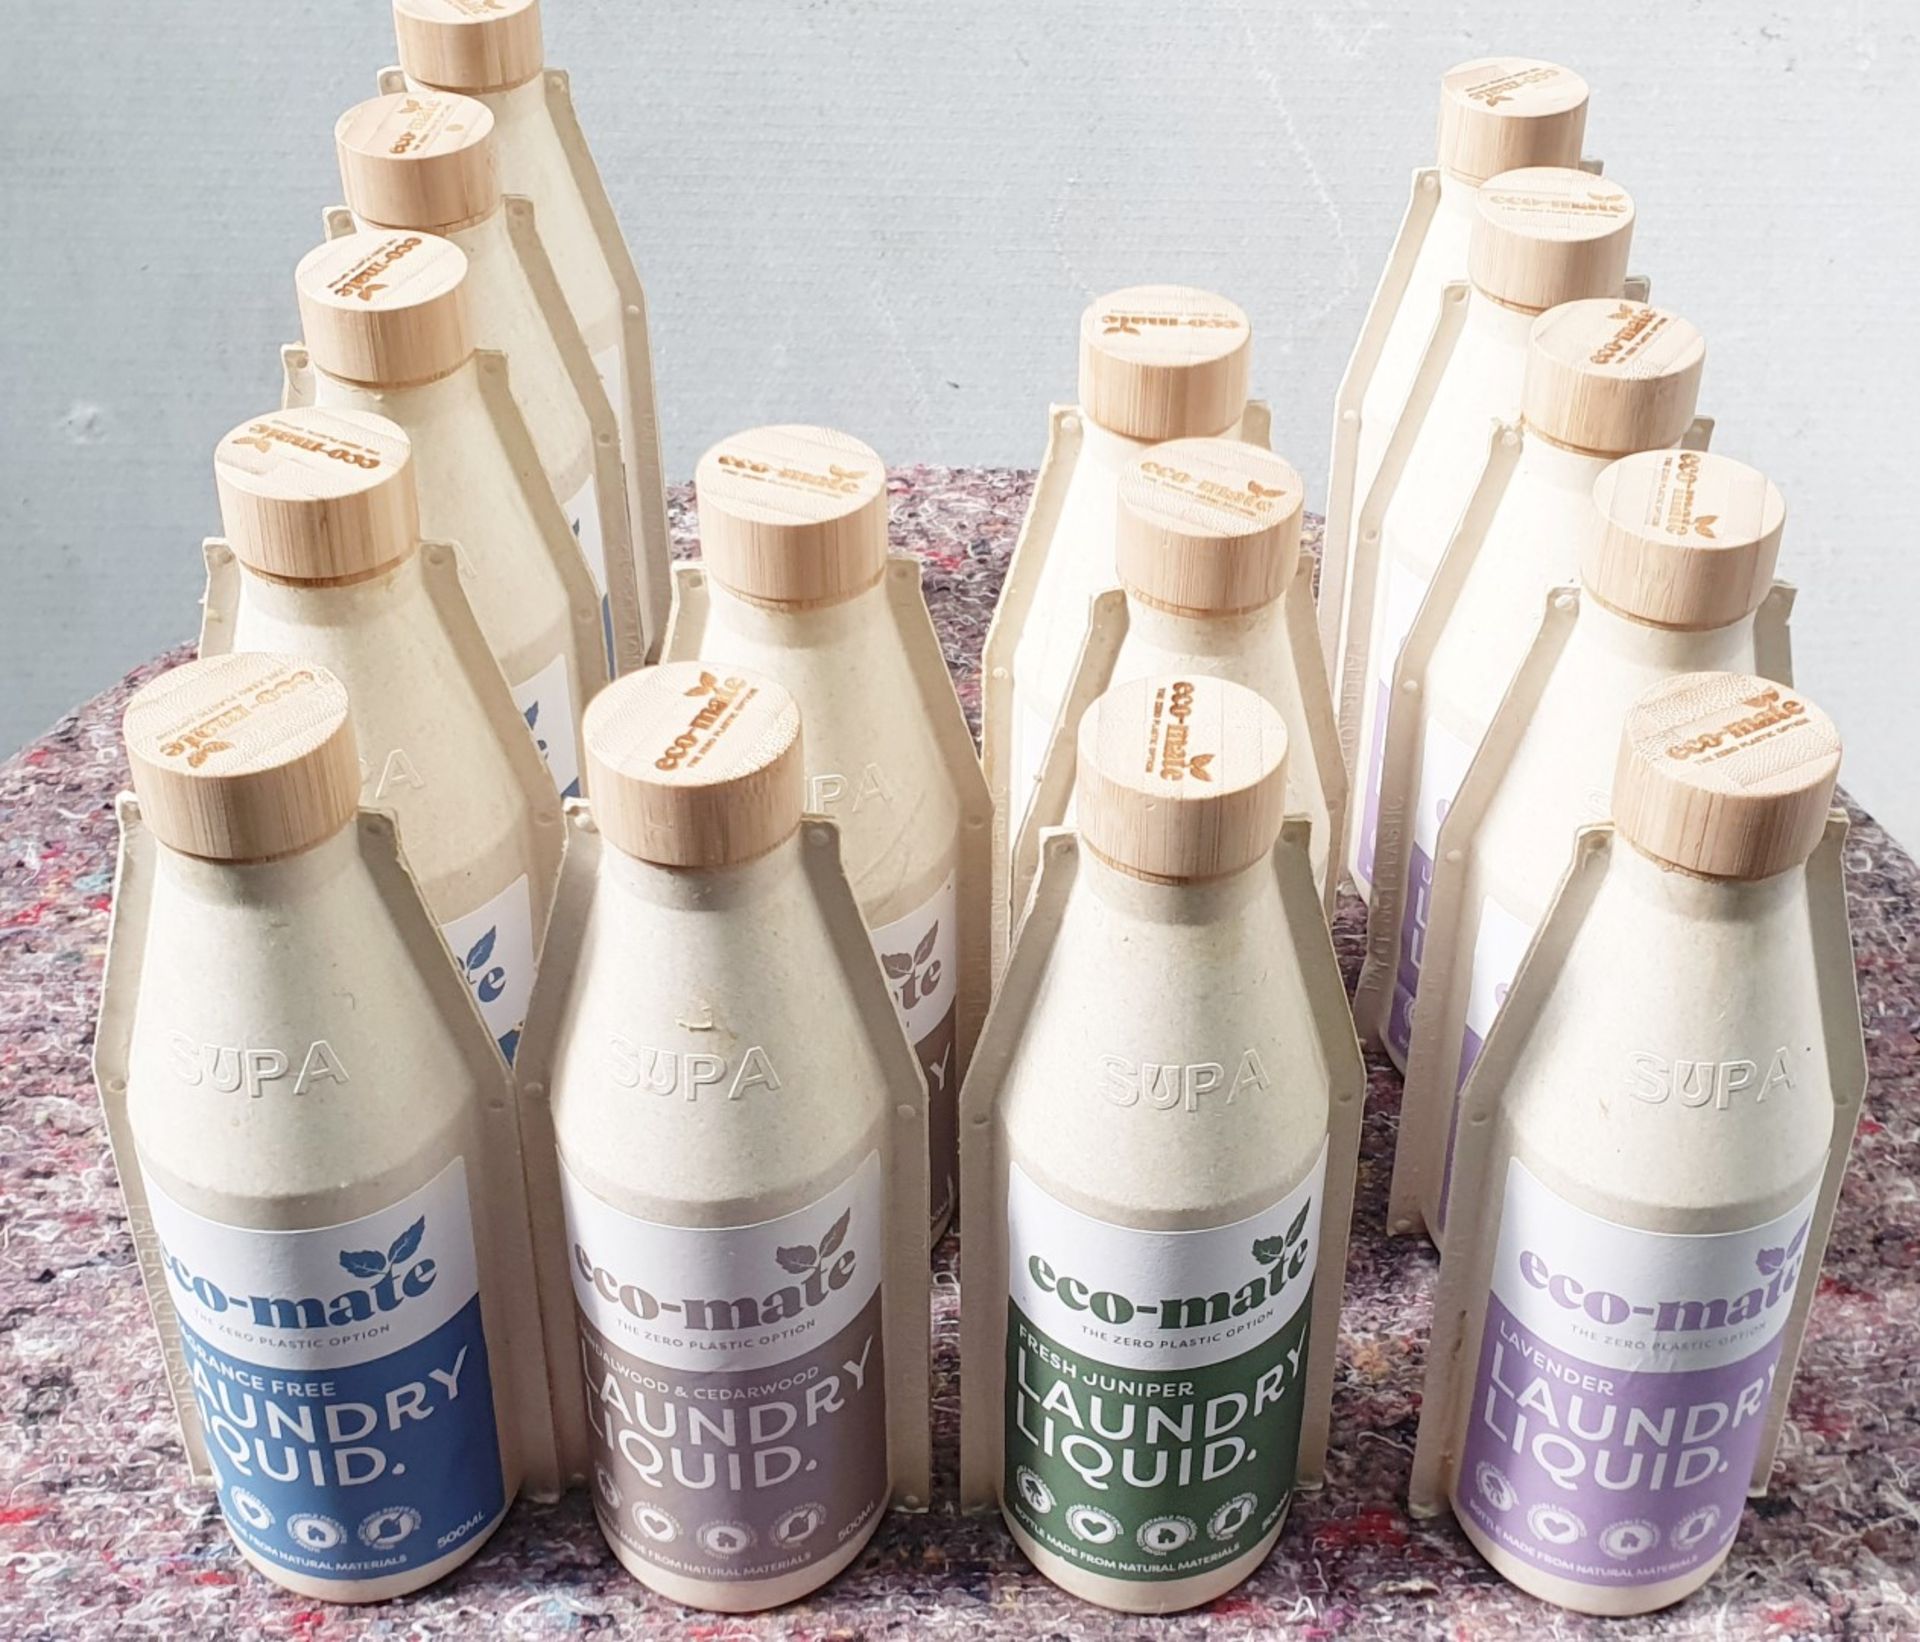 15 x Eco Mate Zero Plastic 500ml Laundry Liquids - Various Scents Included - New Stock - RRP £75 - - Image 10 of 11